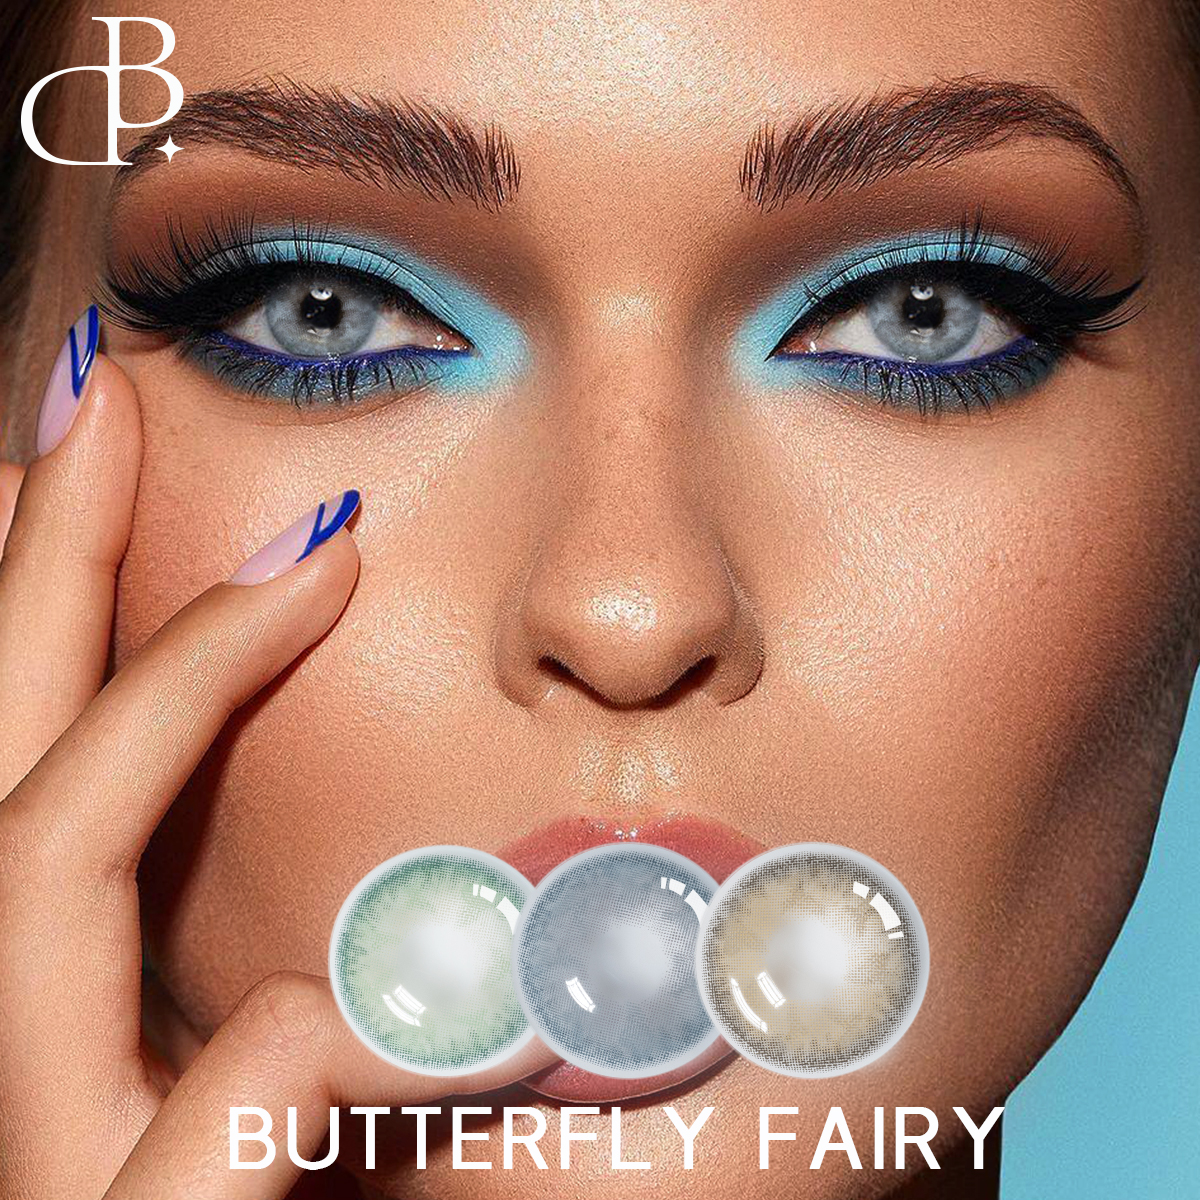 BUTTERFLY FAIRY Wholesale Factory Price Color Contact Lenses Fashion Cosmetic Colored Eye Contact Lens For dbeyes